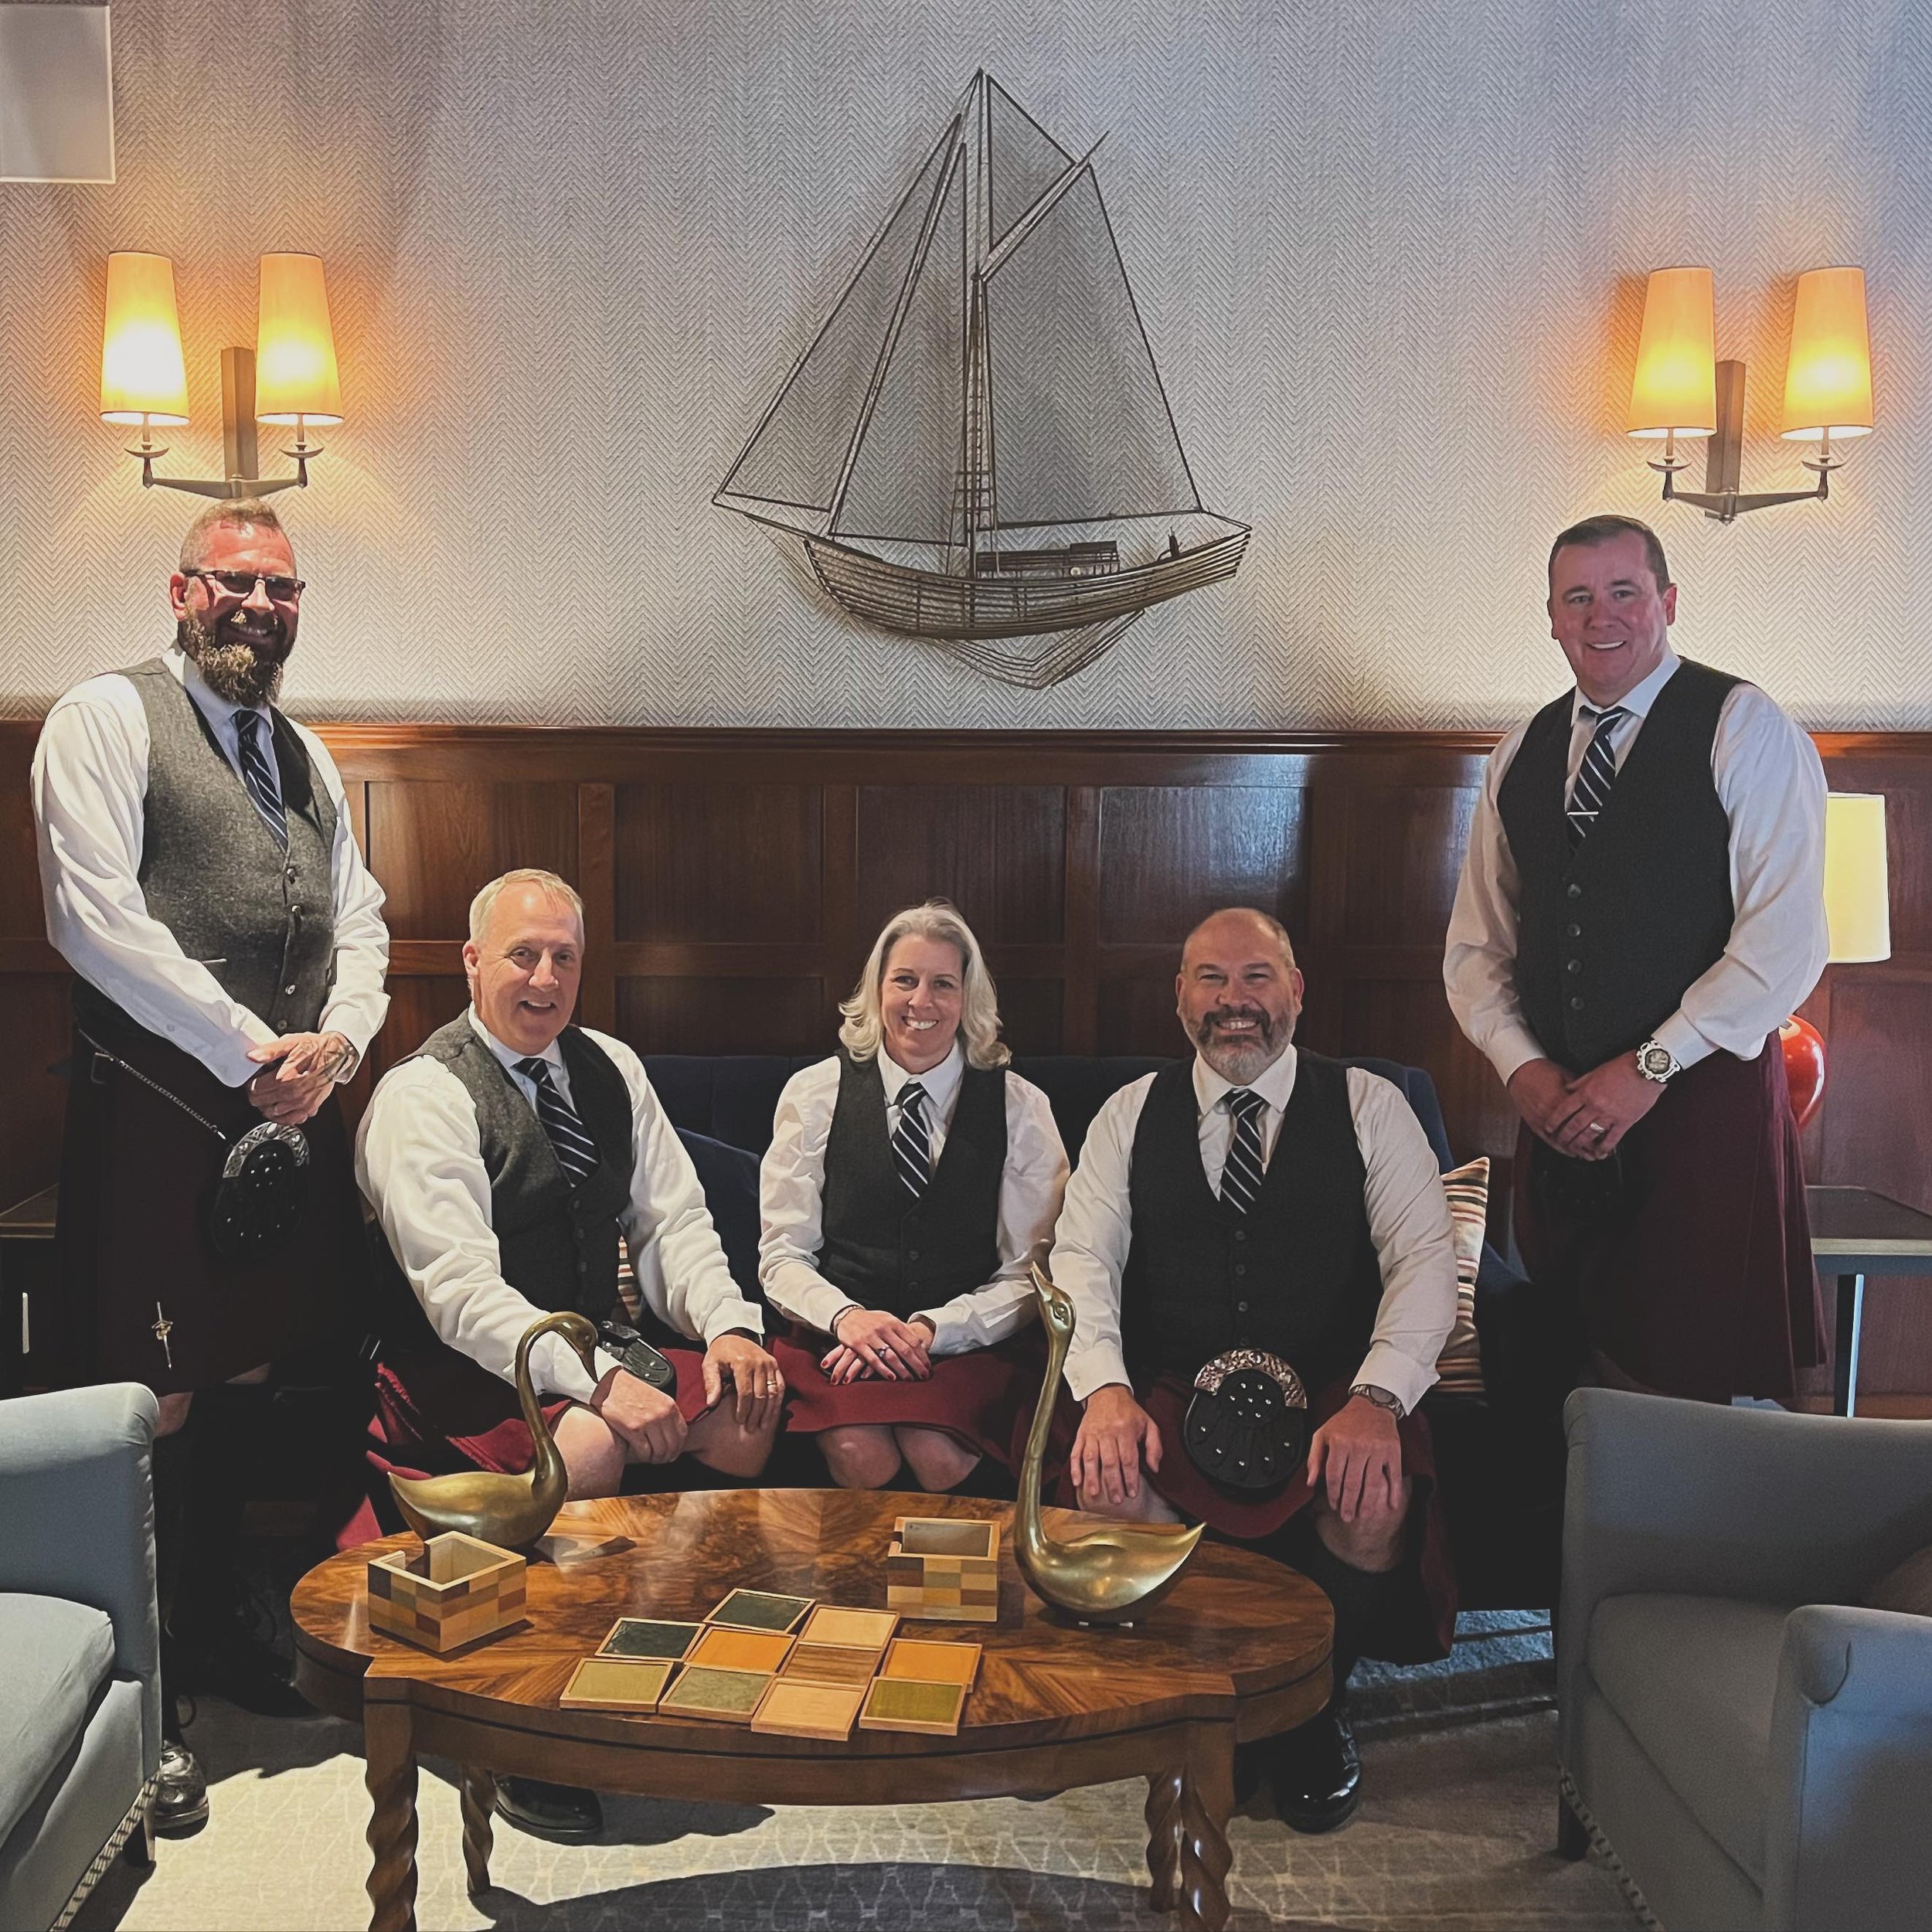 This weekend a few of our members were asked to be a part of a beautiful wedding at Peconic Bay Yacht Club. Father of the Bride, Tom O&rsquo;Reilly was so excited to have the band as it was a long family tradition to have bagpipers at family weddings